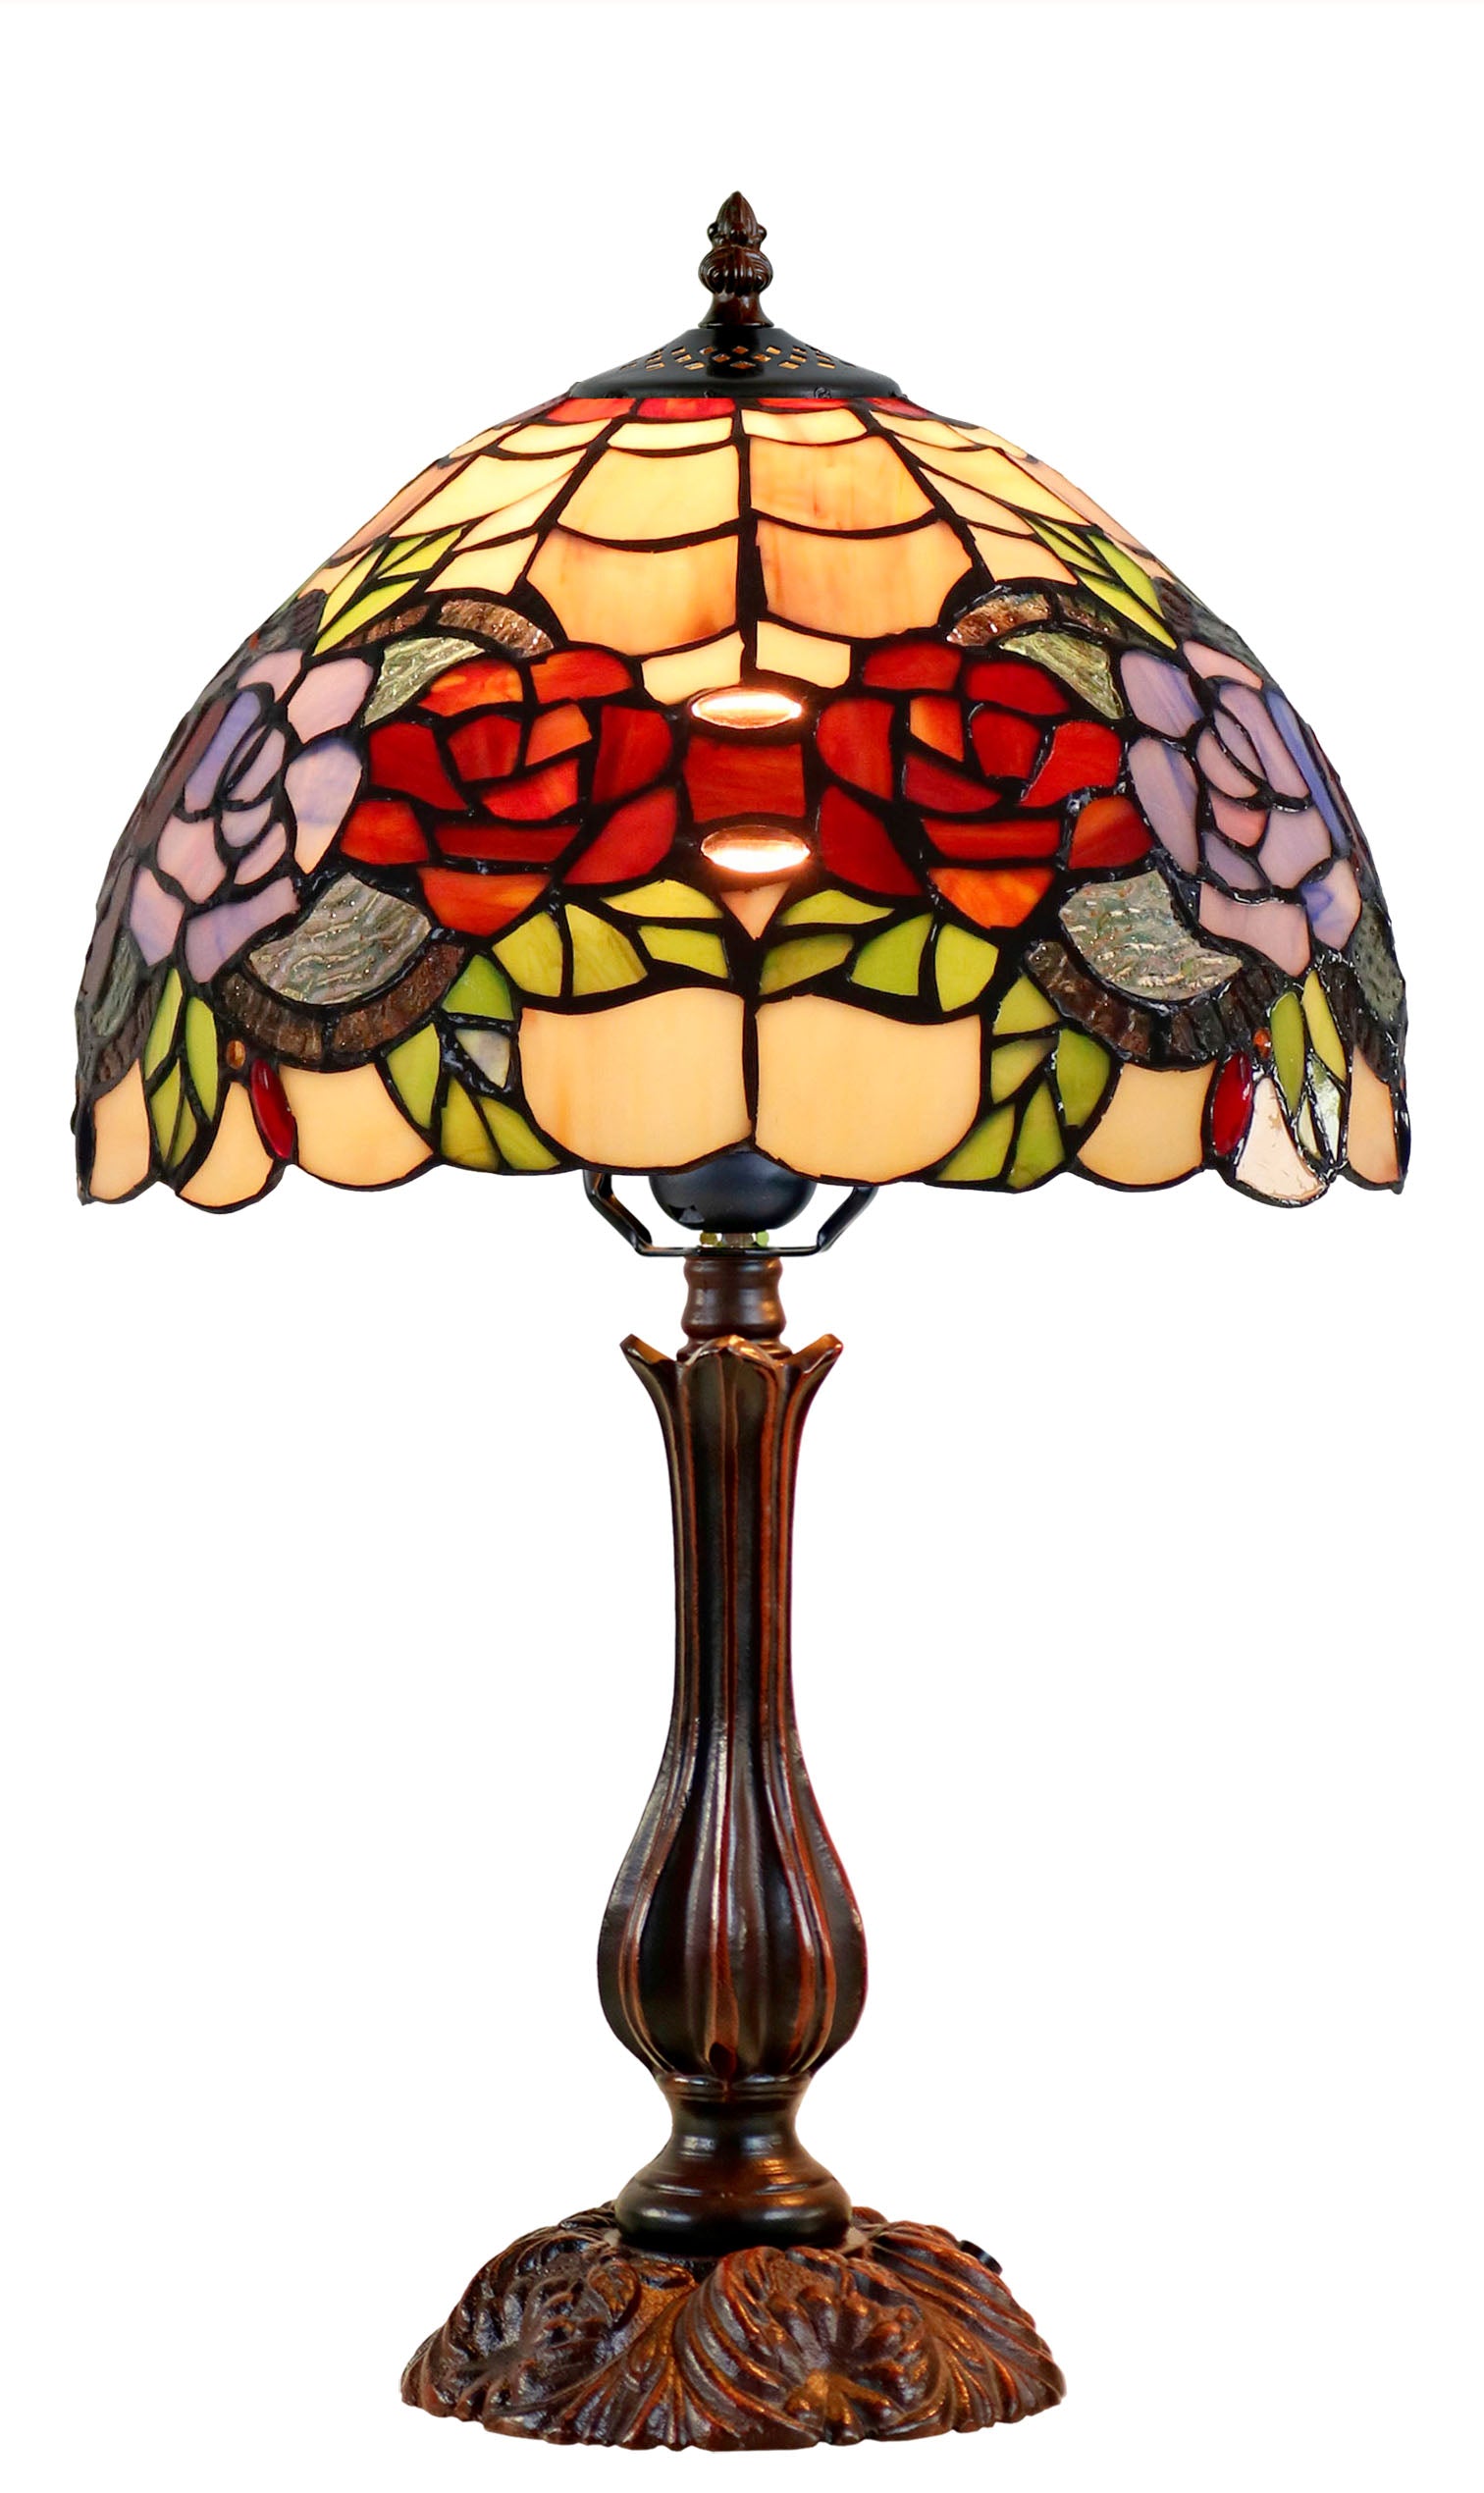 12" Rose Style Leadlight Stained Glass Tiffany Bedside Lamp